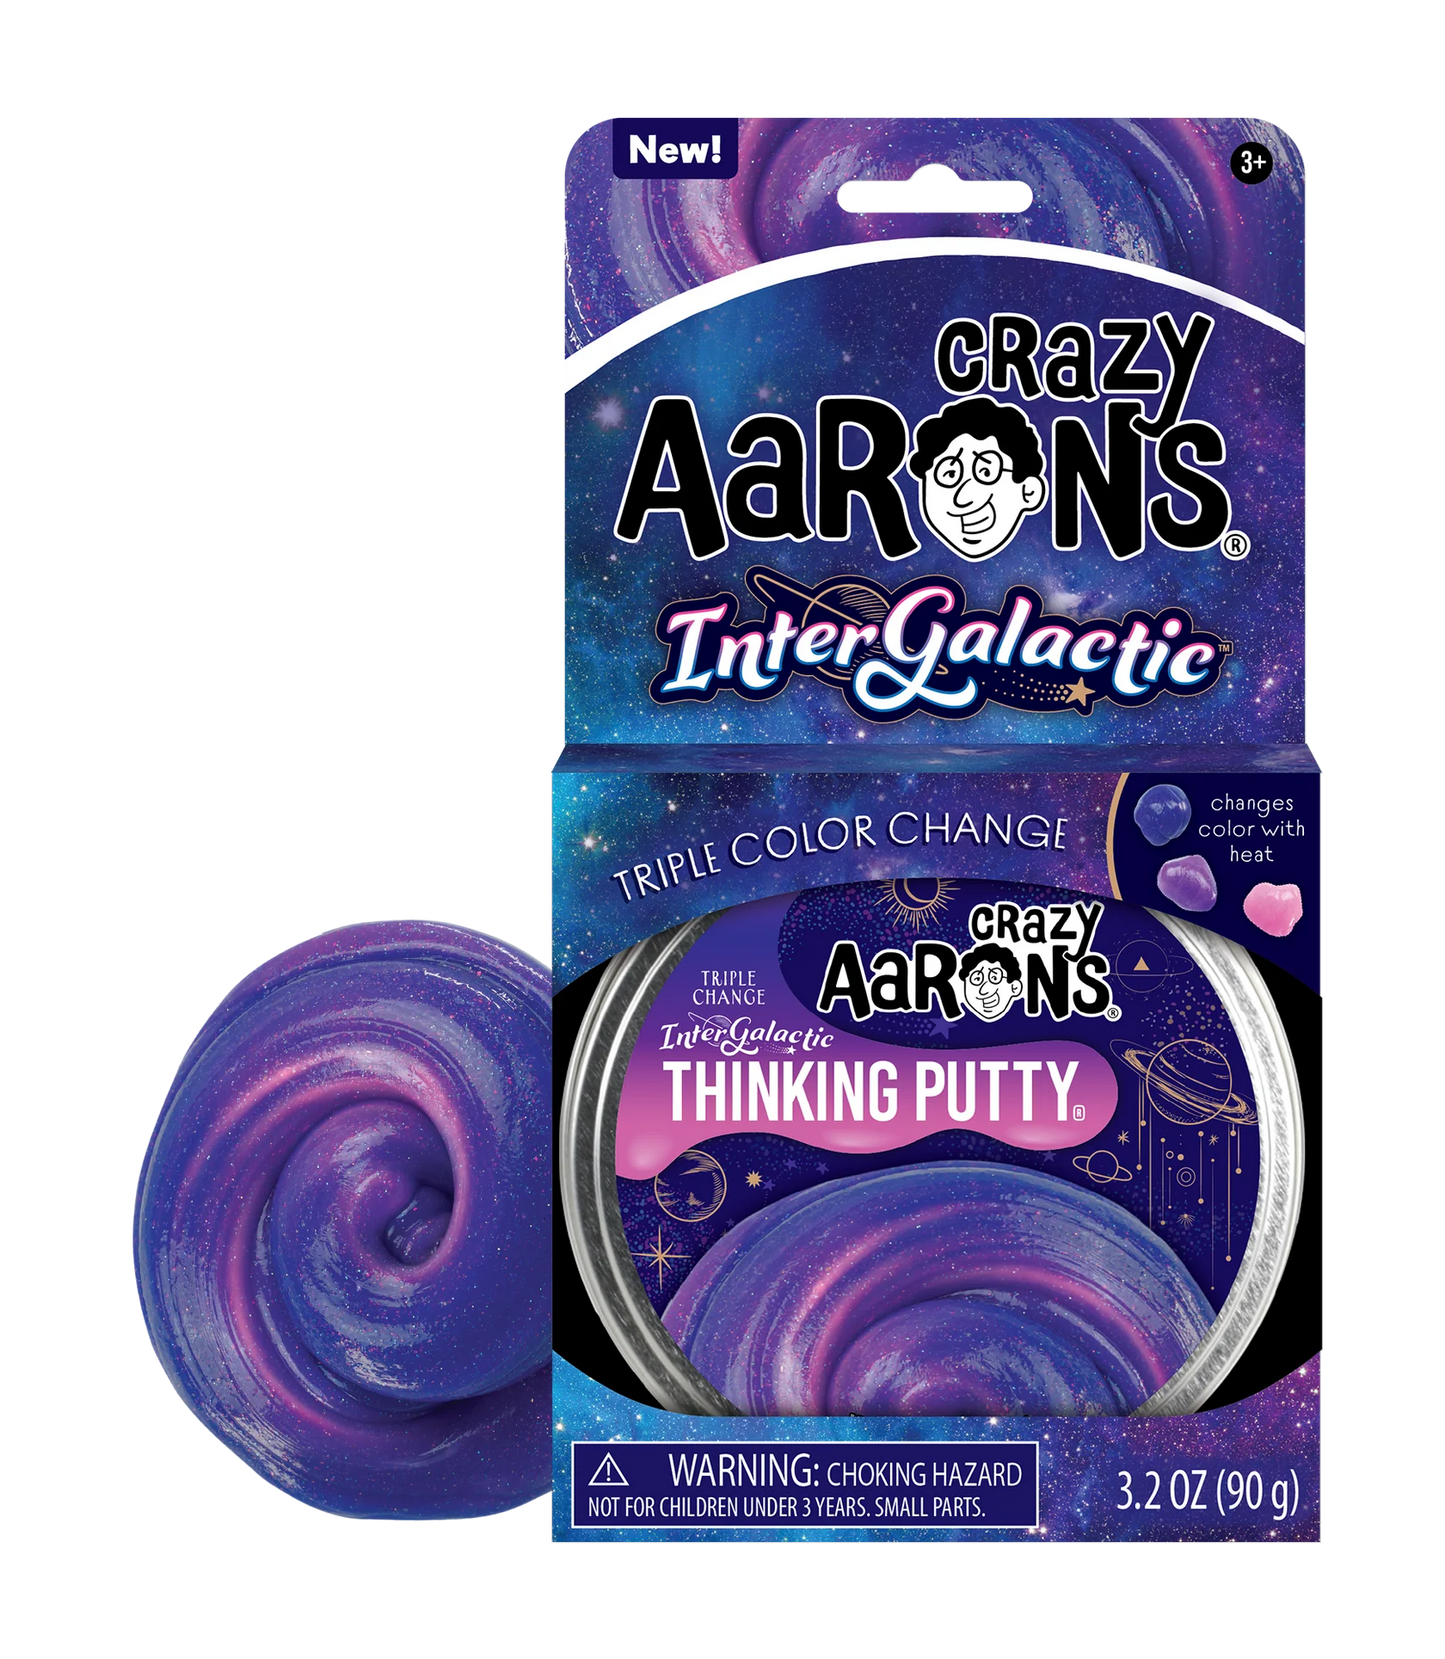 CRAZY AARON'S THINKING PUTTY INTERGALACTIC (TRIPLE COLOR CHANGE)